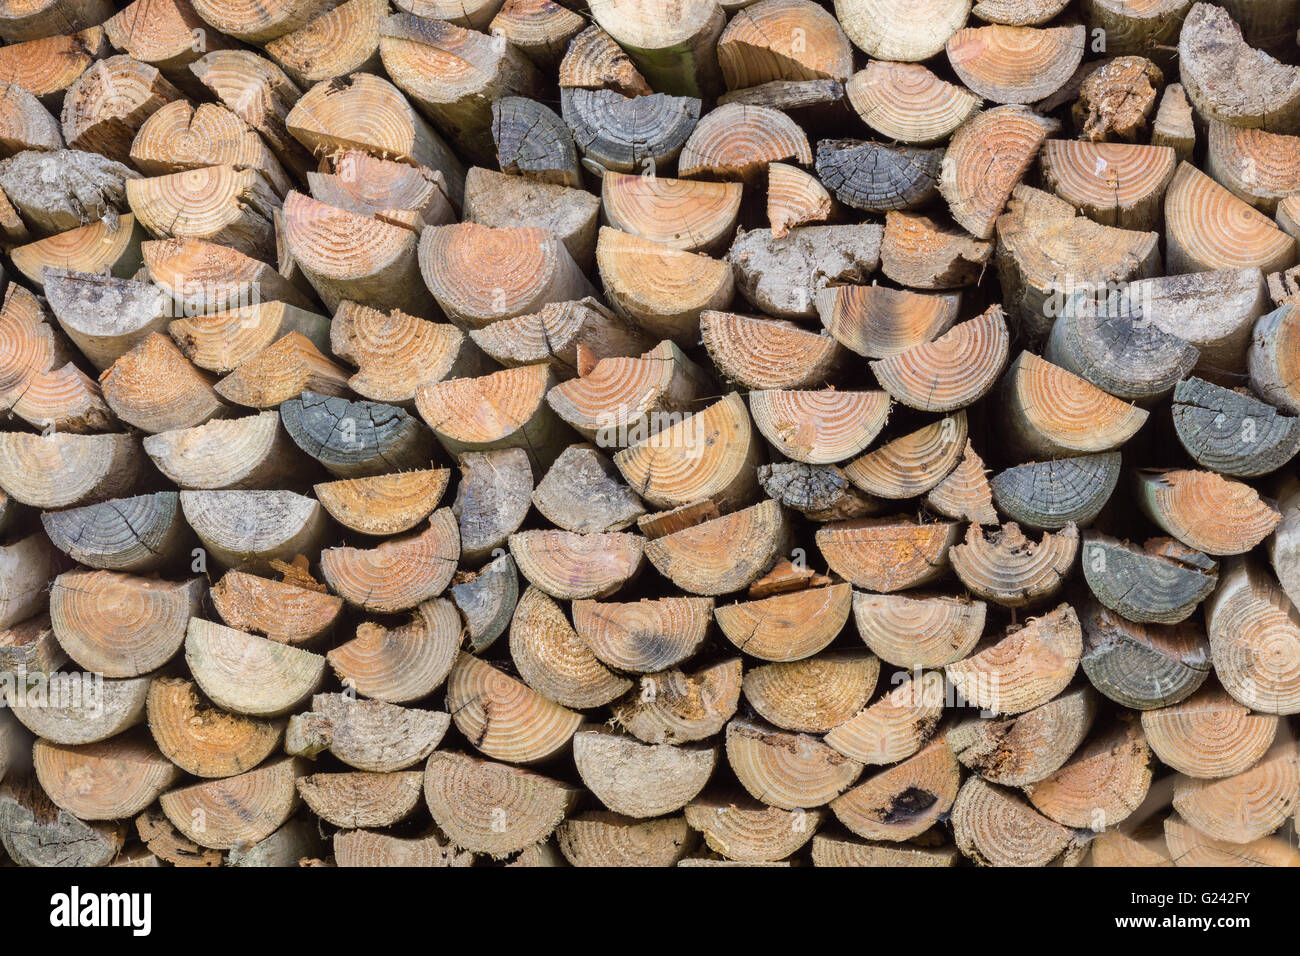 A pile of stacked firewood. Stock Photo